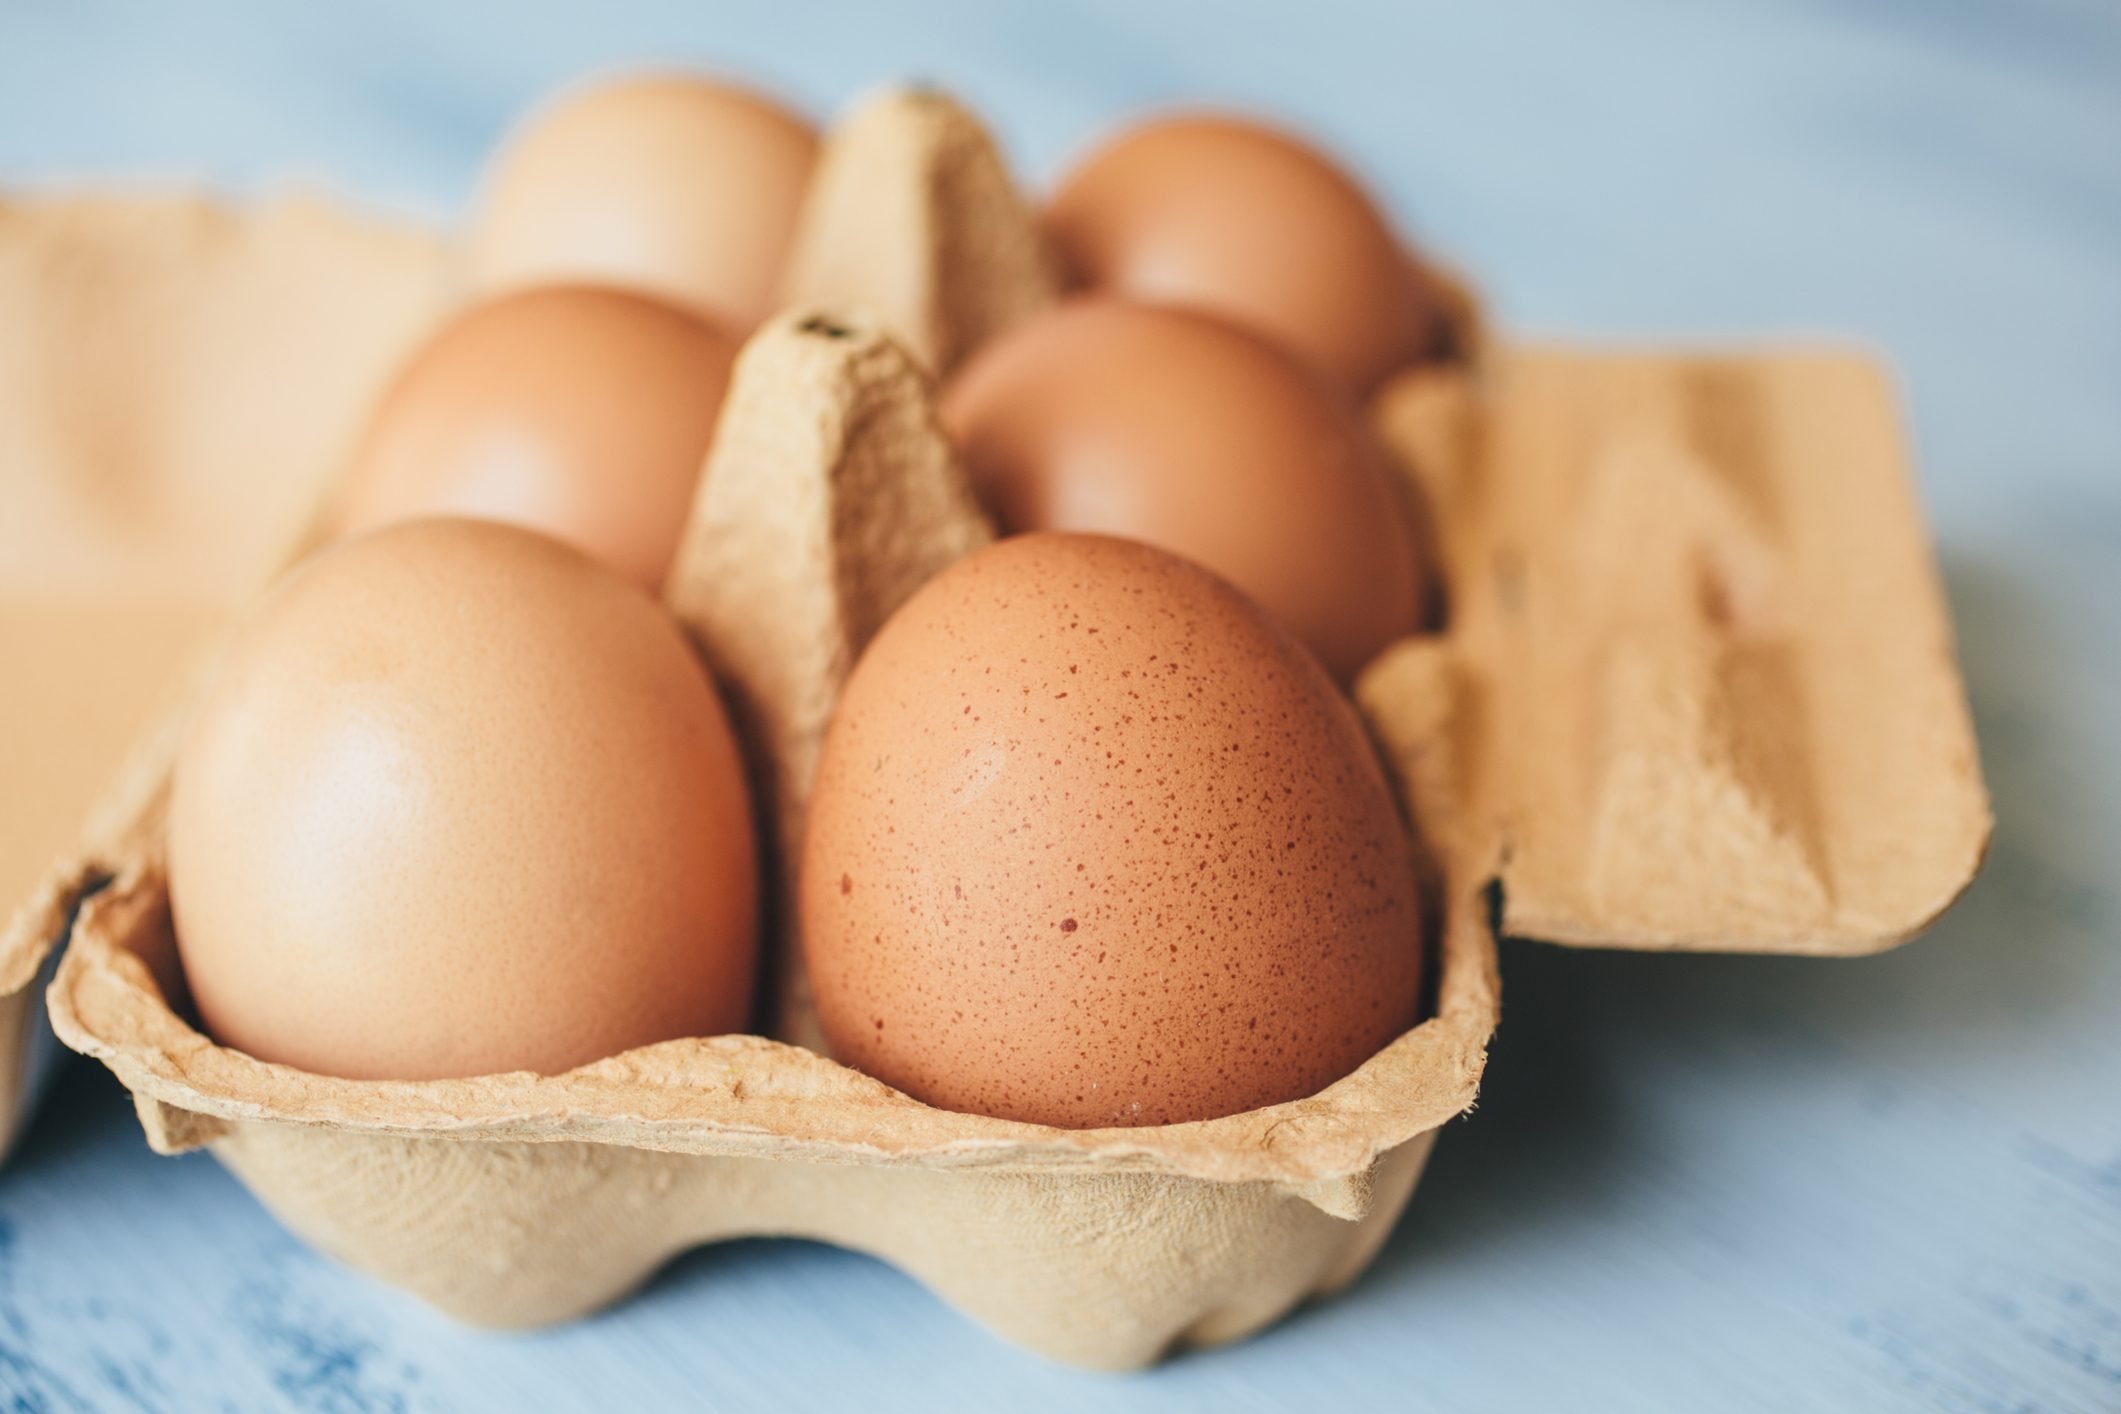 What process do you use to clean your fresh eggs? Why do you